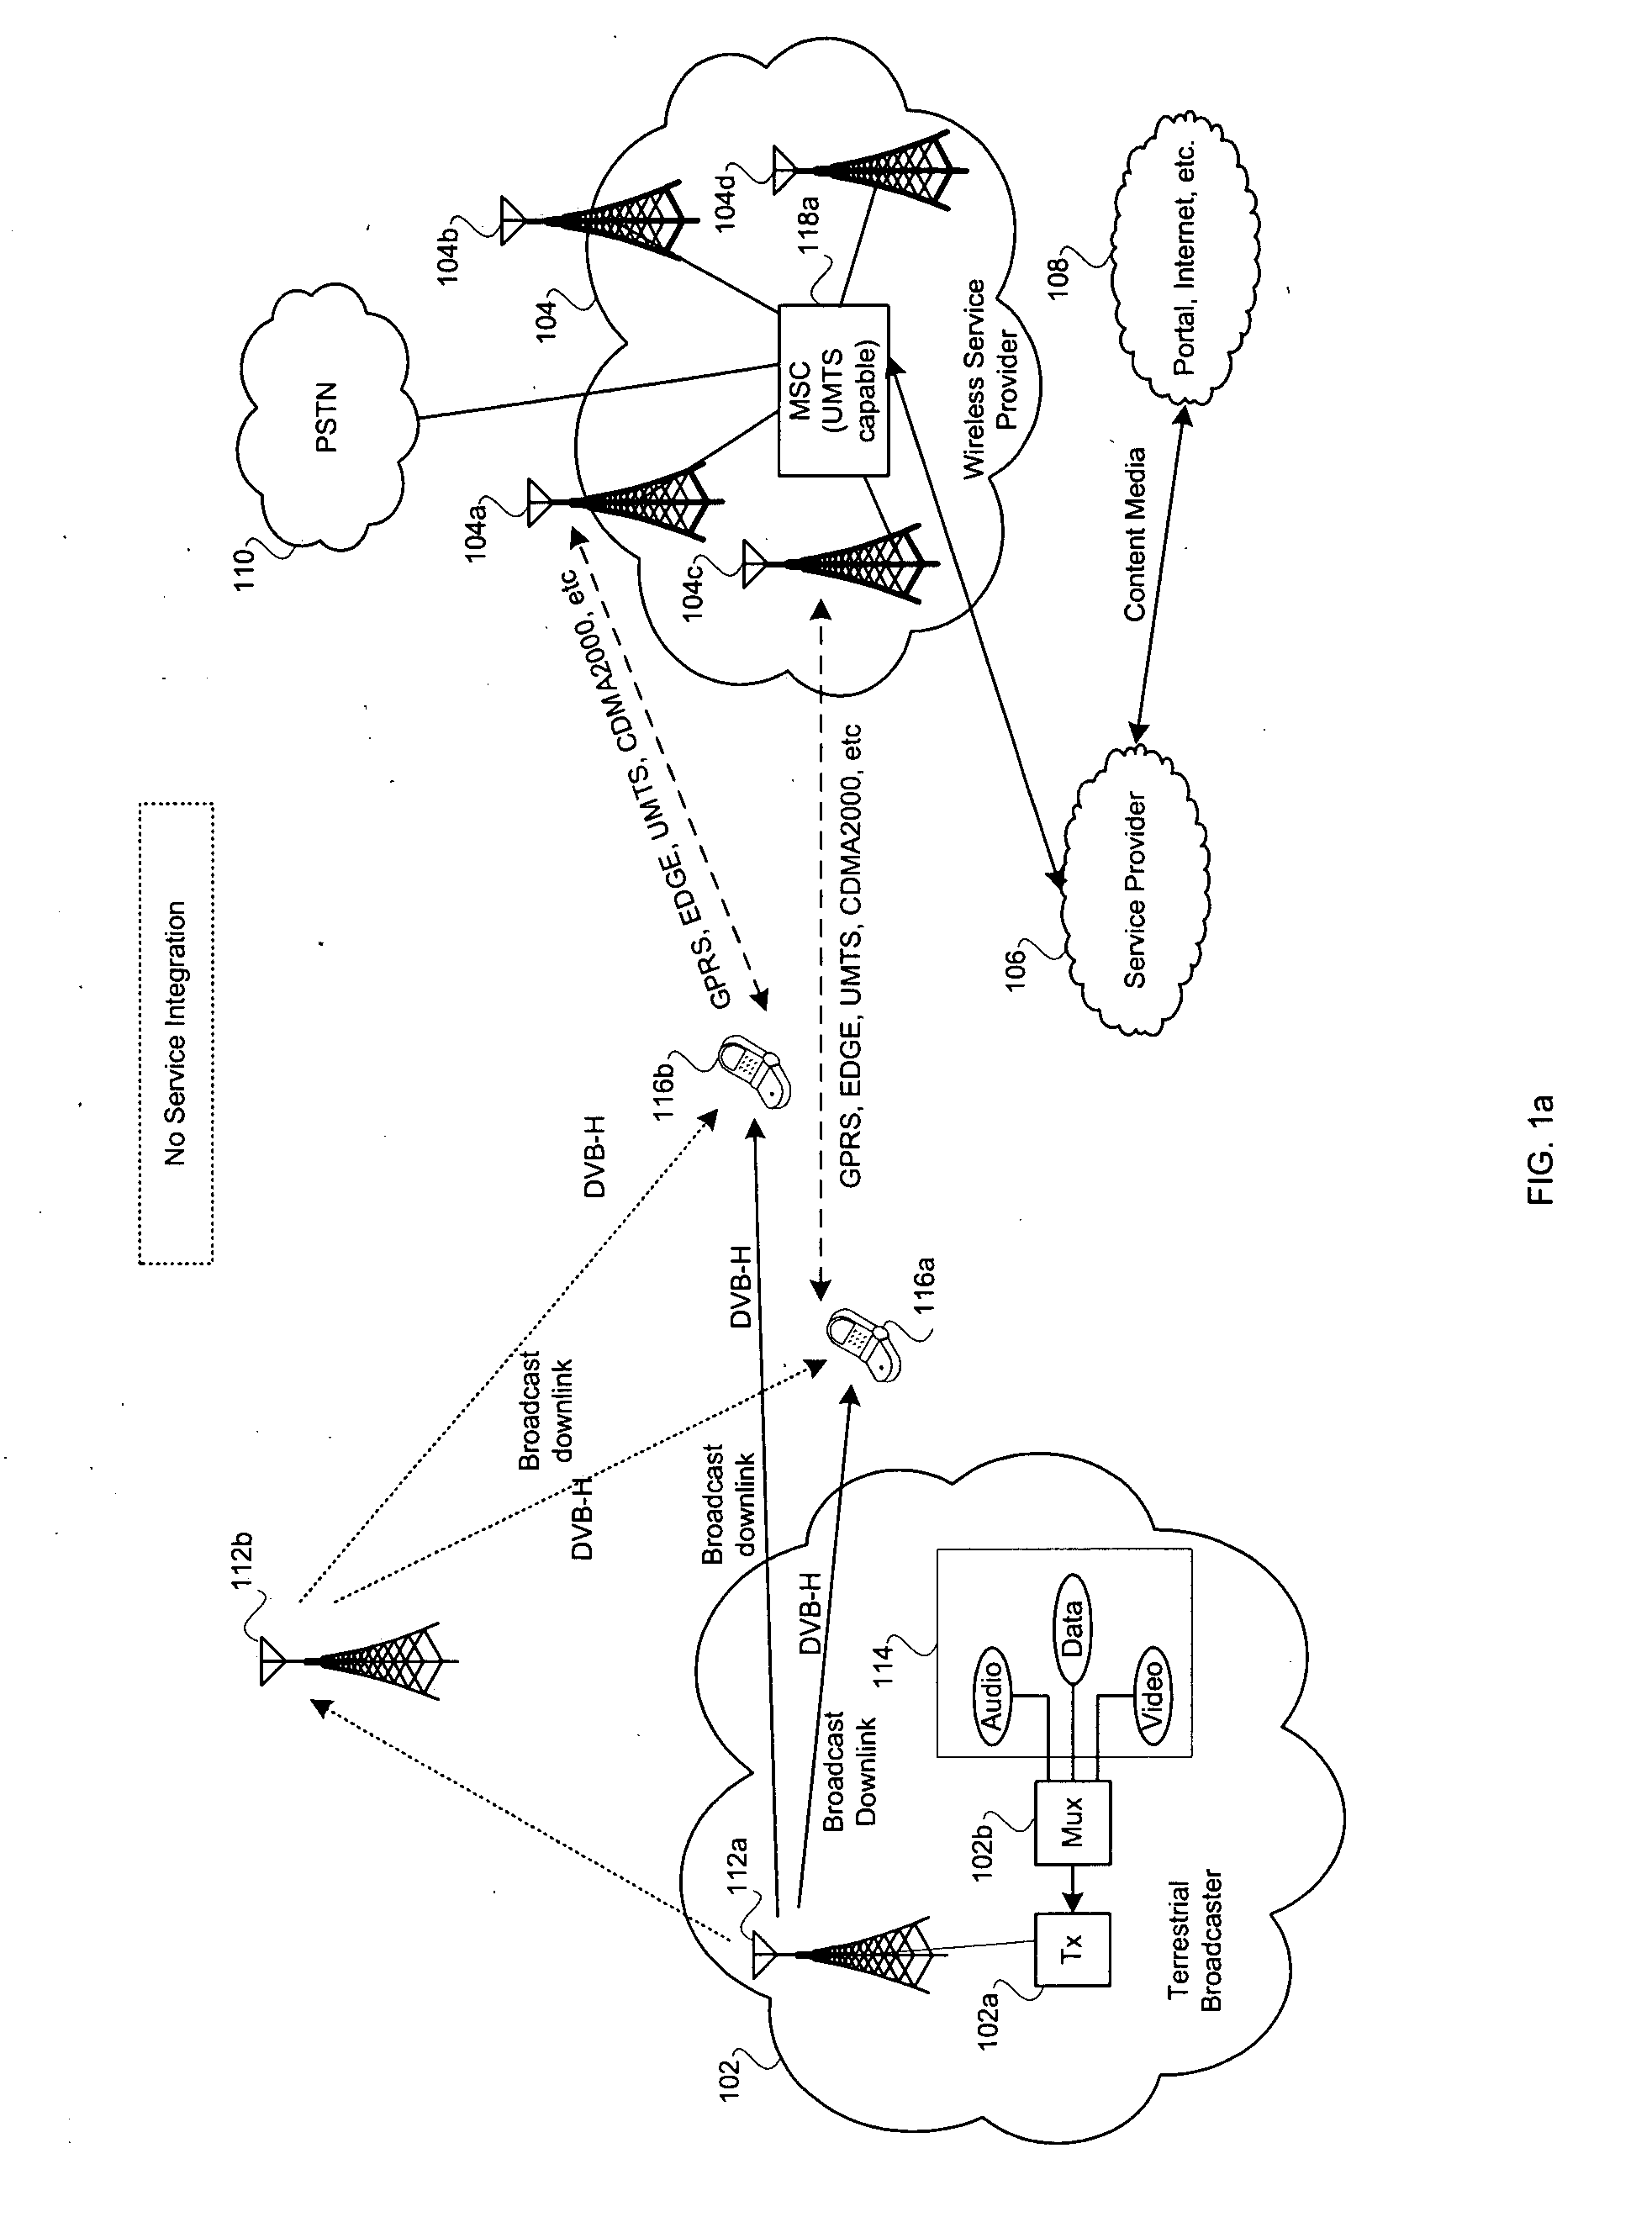 Method and system for mobile architecture supporting cellular or wireless networks and broadcast utilizing a multichip cellular and broadcast silicon solution